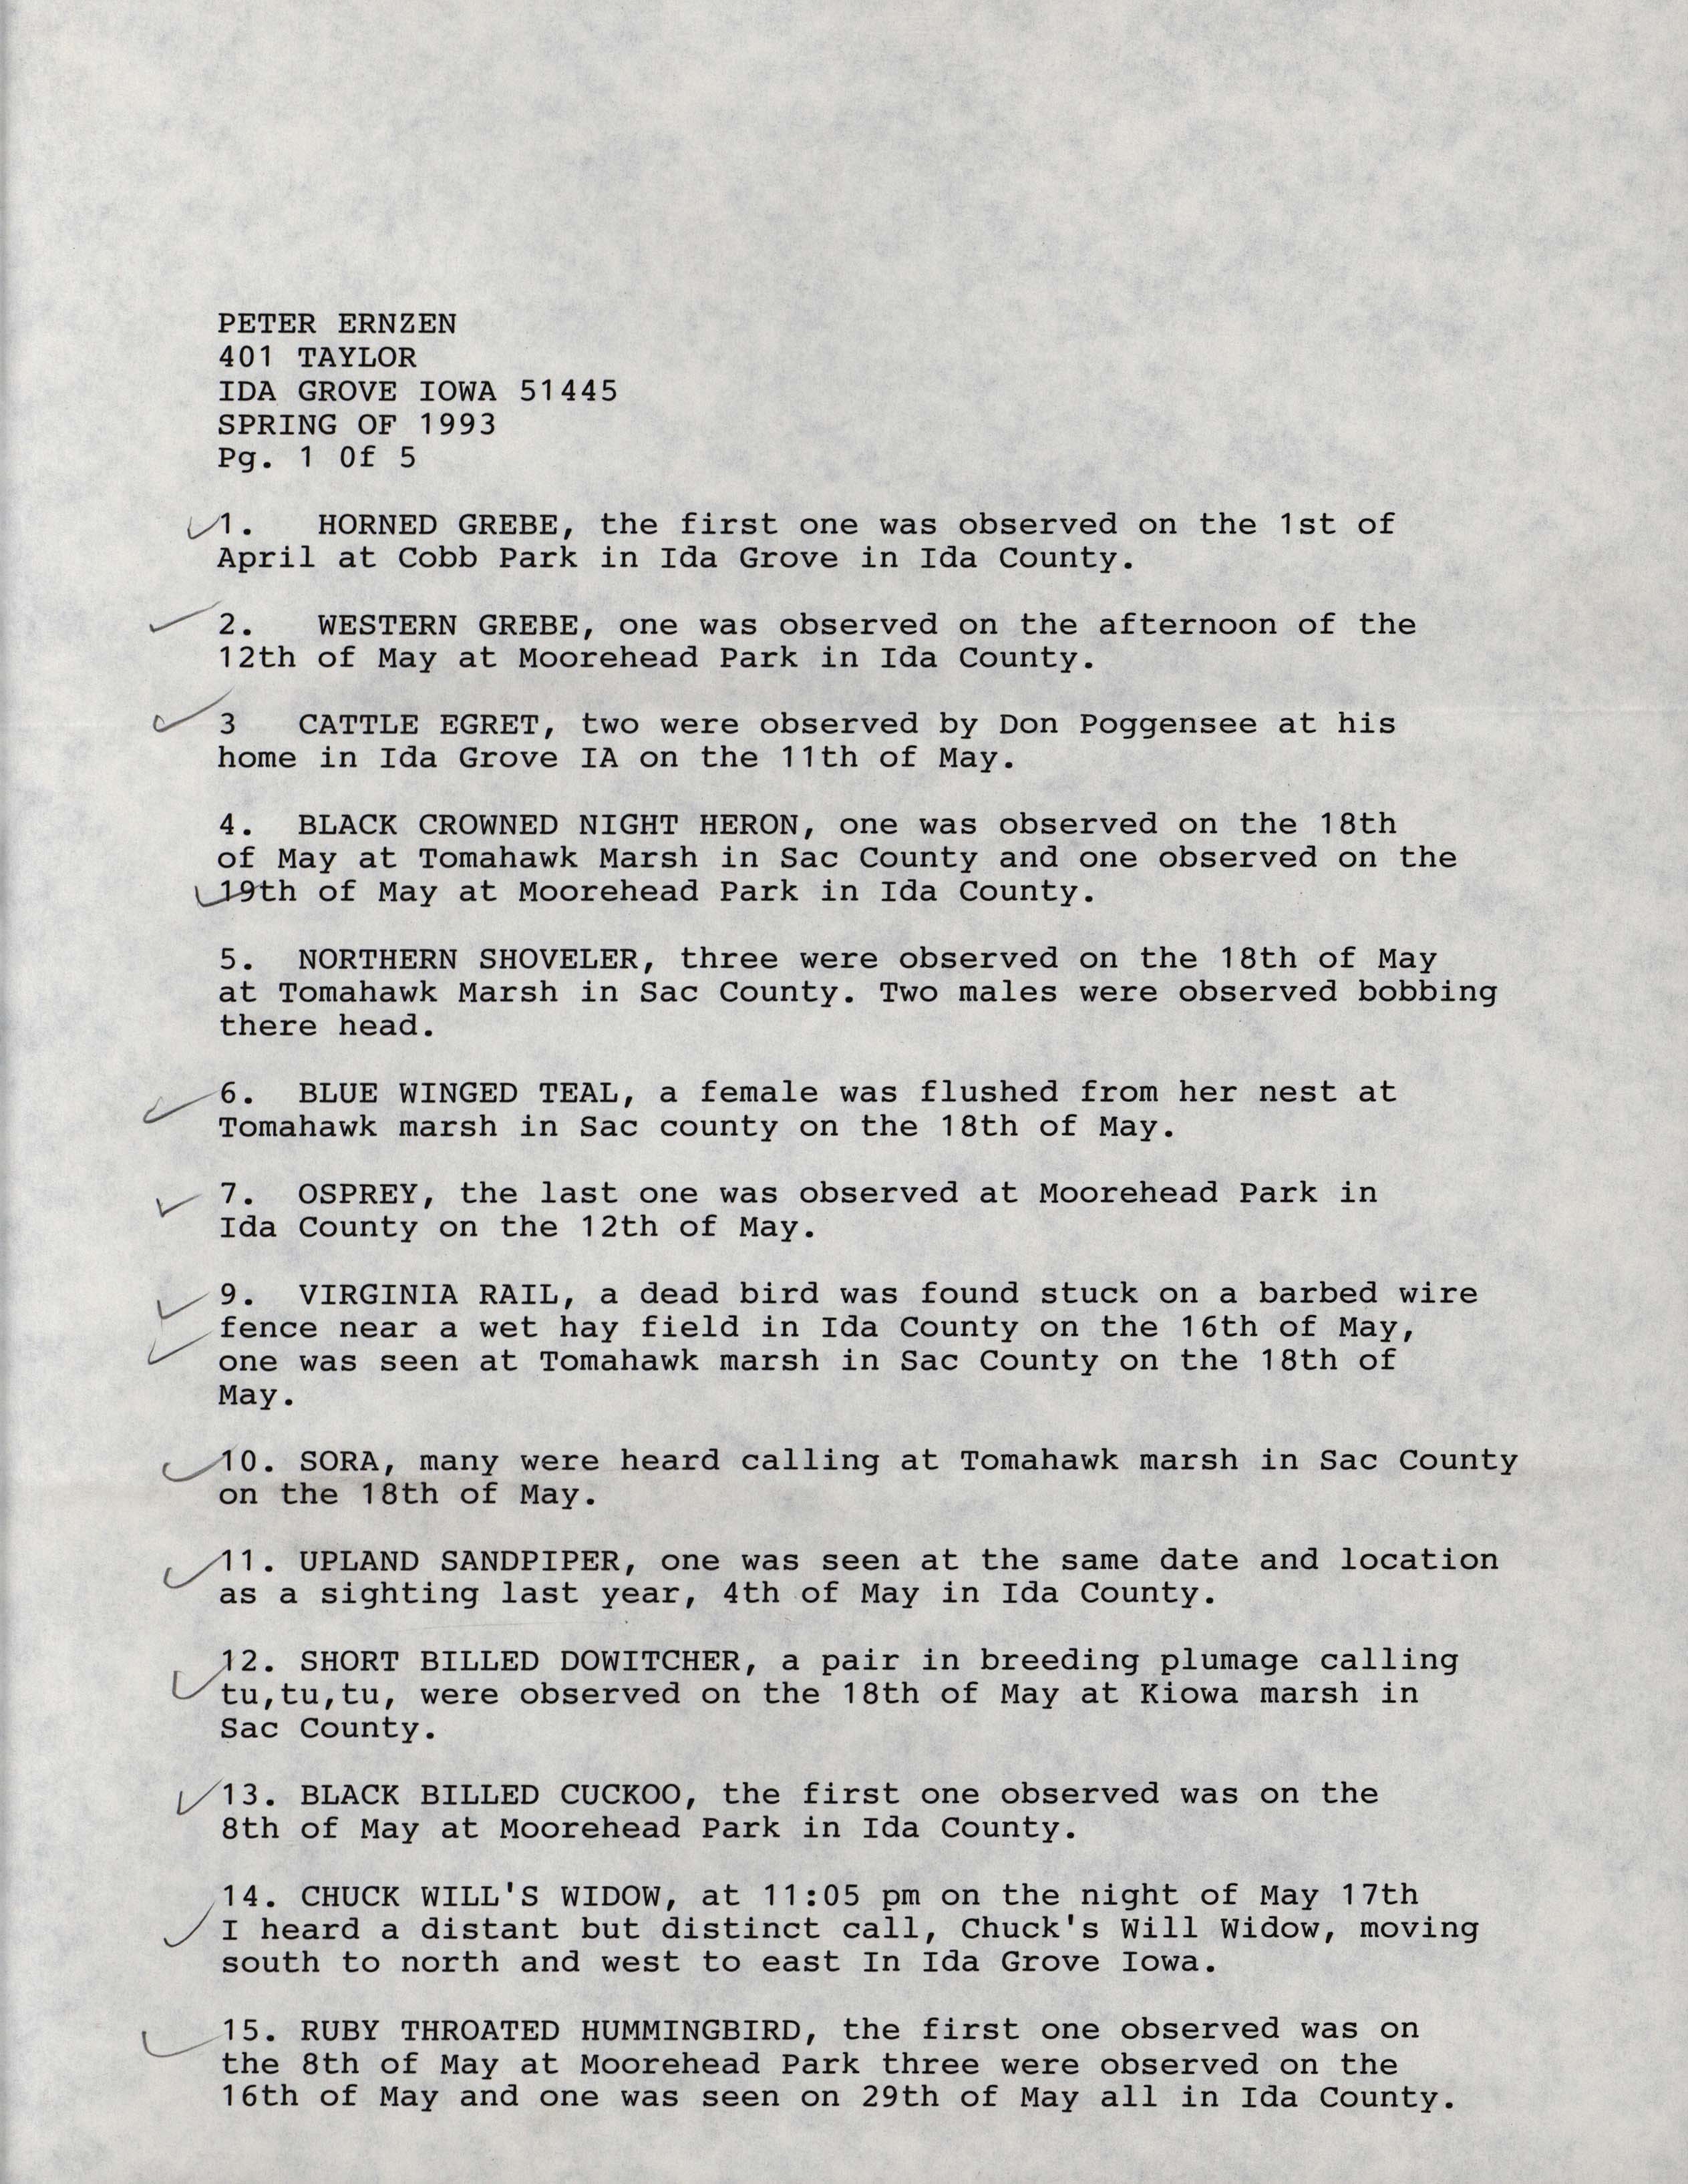 Annotated bird sighting list for Spring 1993 compiled by Peter Ernzen